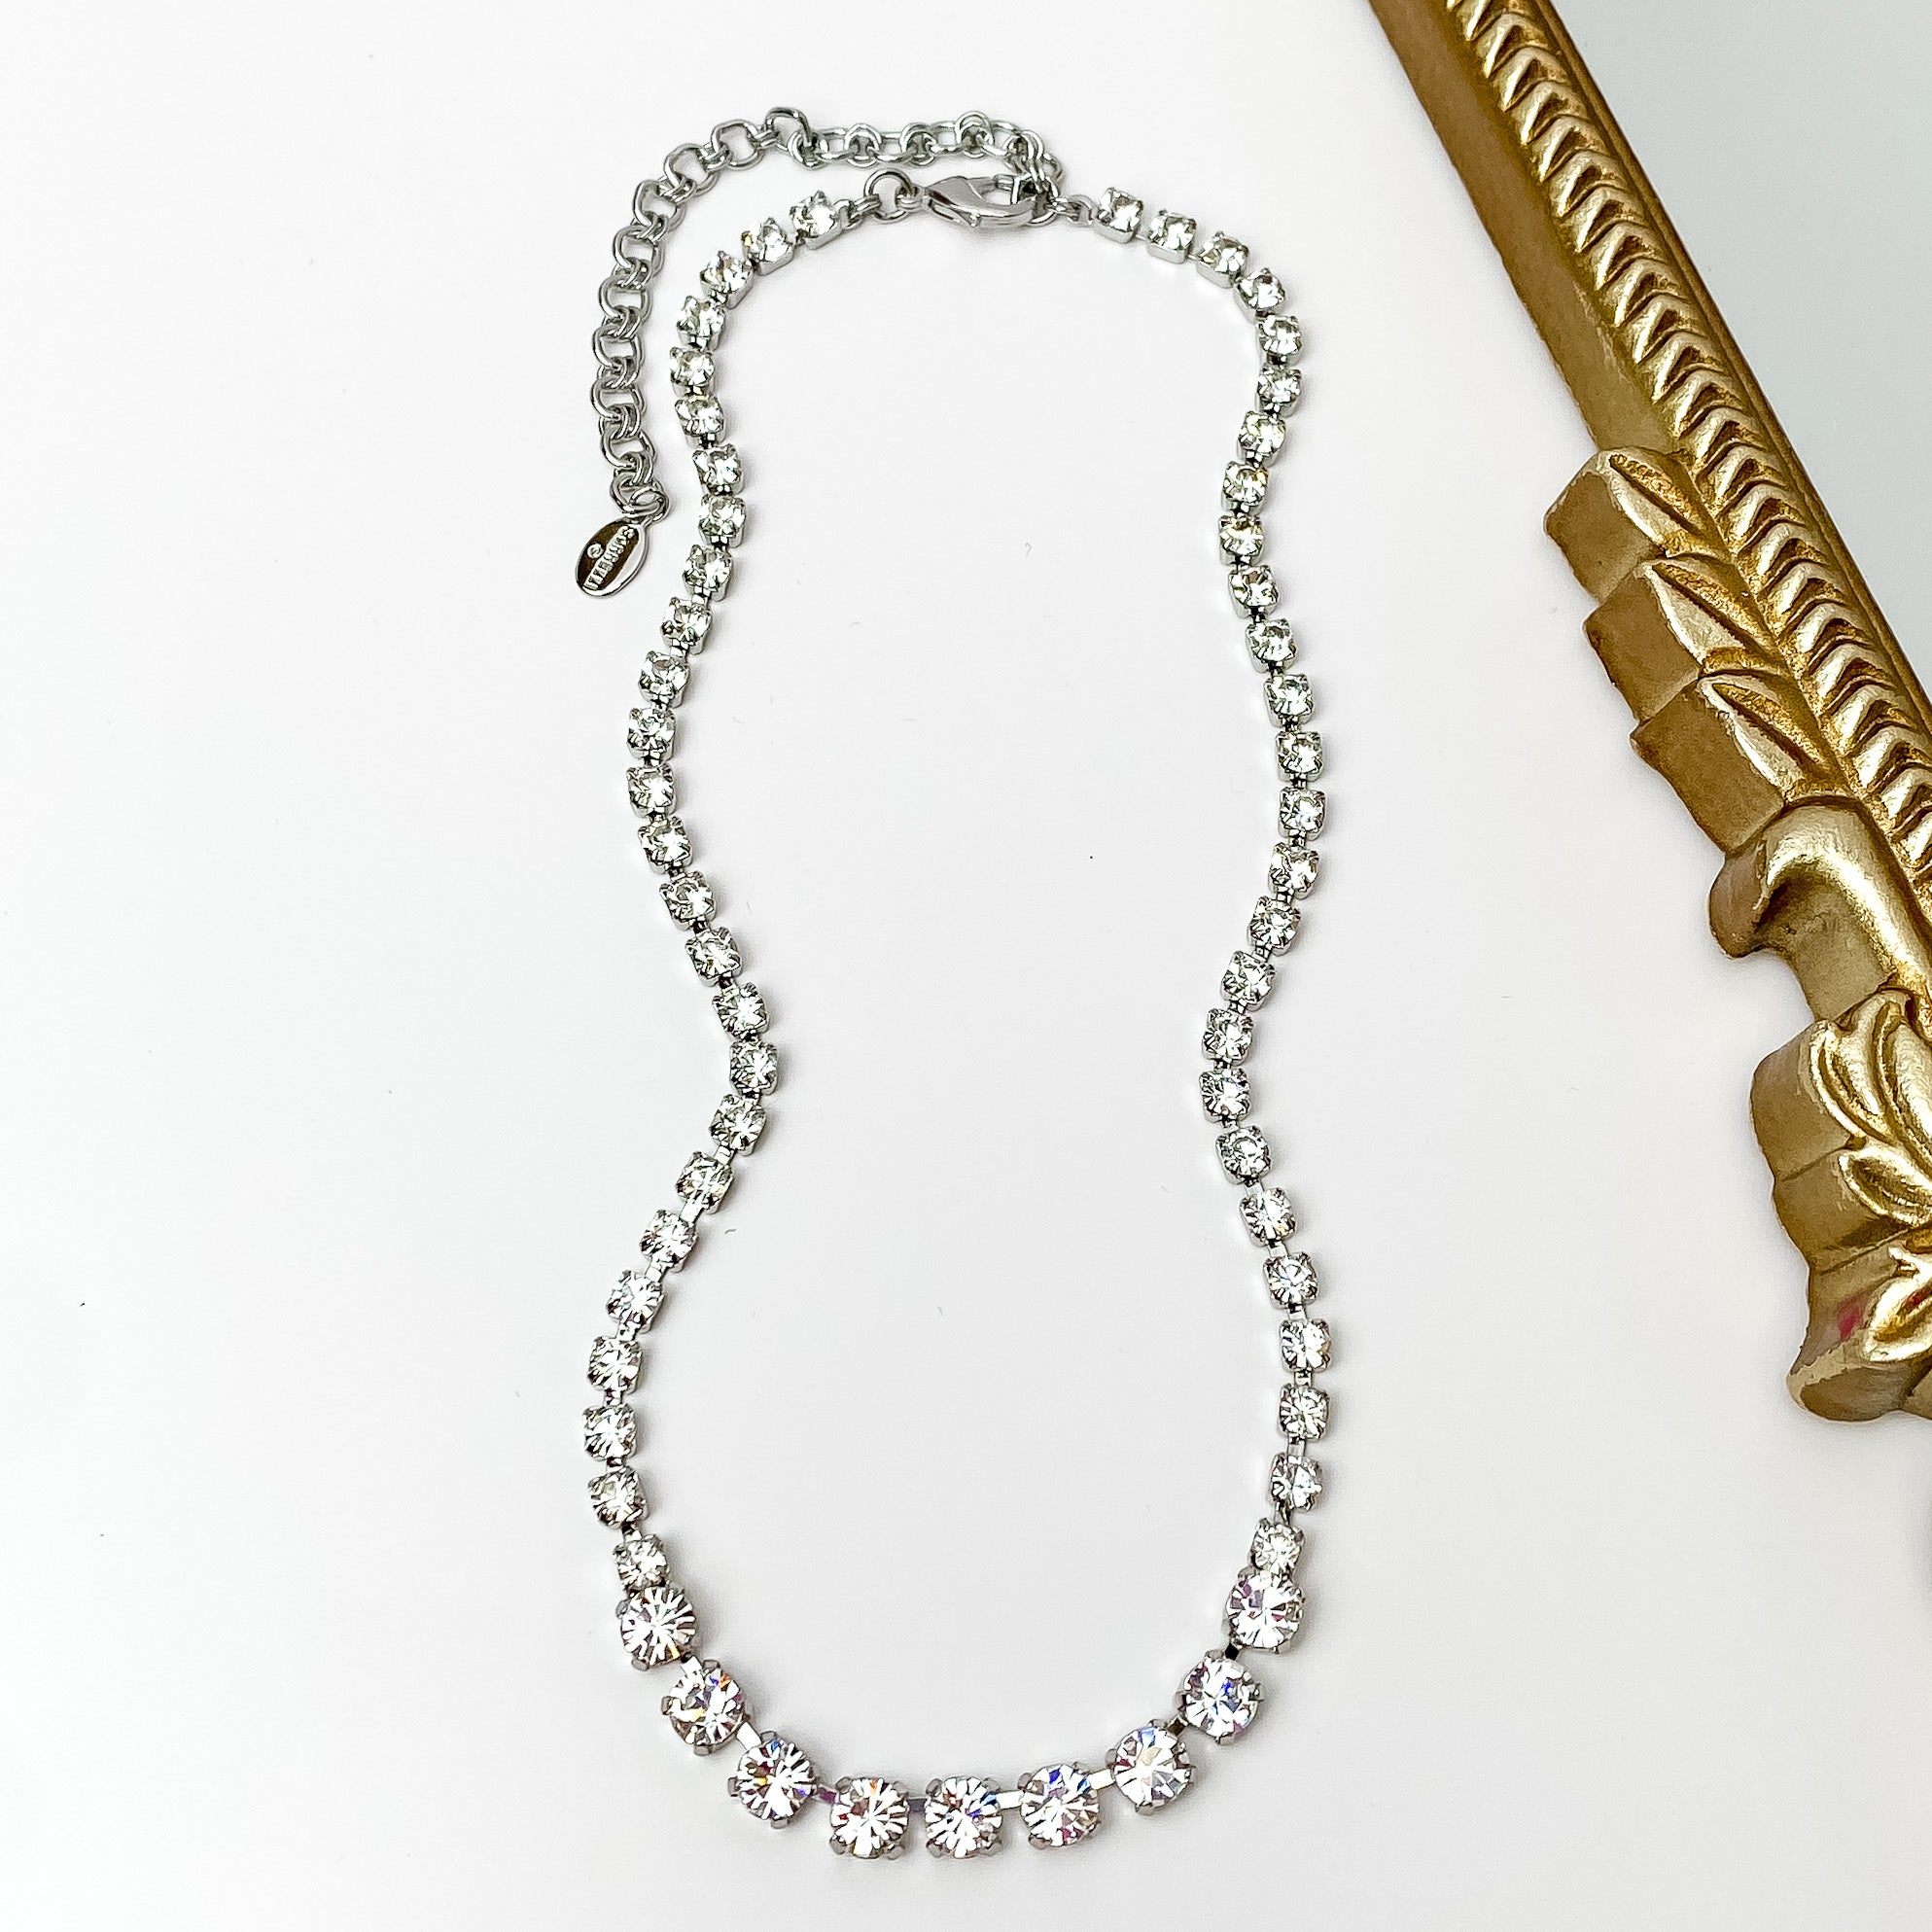 Pictured is a silver necklace with clear crystals. This necklace is pictured on a white background with a gold mirror on the right side.